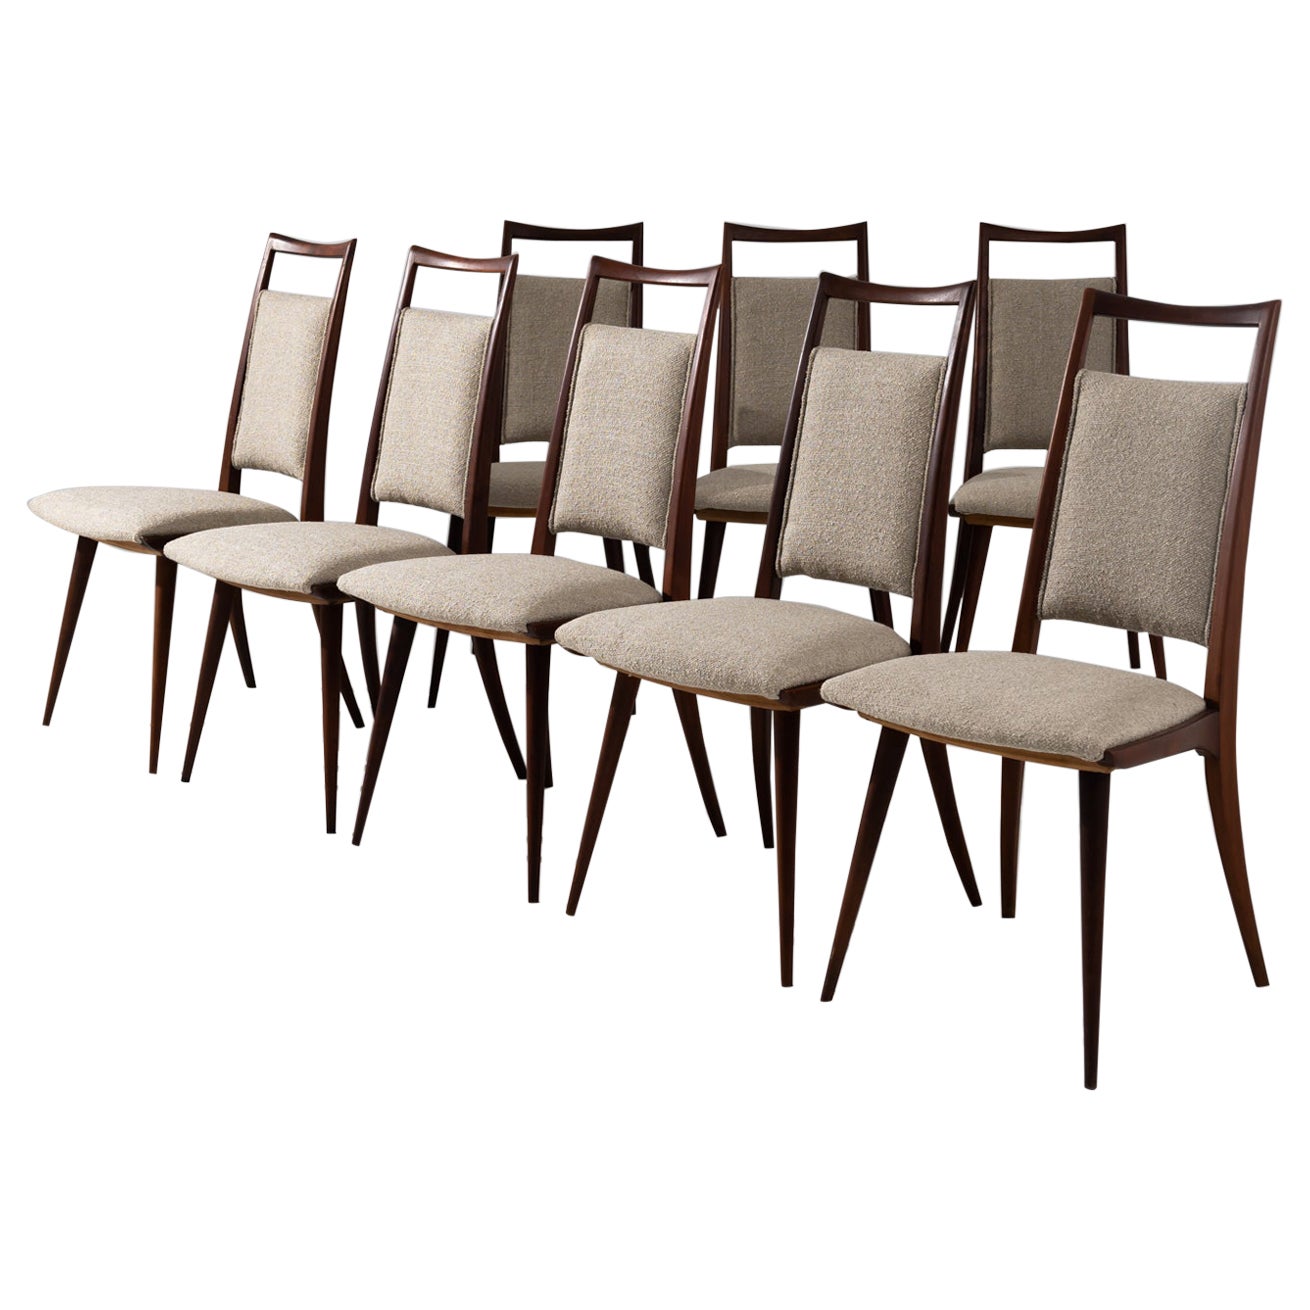 Danish Modern Wooden Upholstered Dining Chairs, Set of Eight